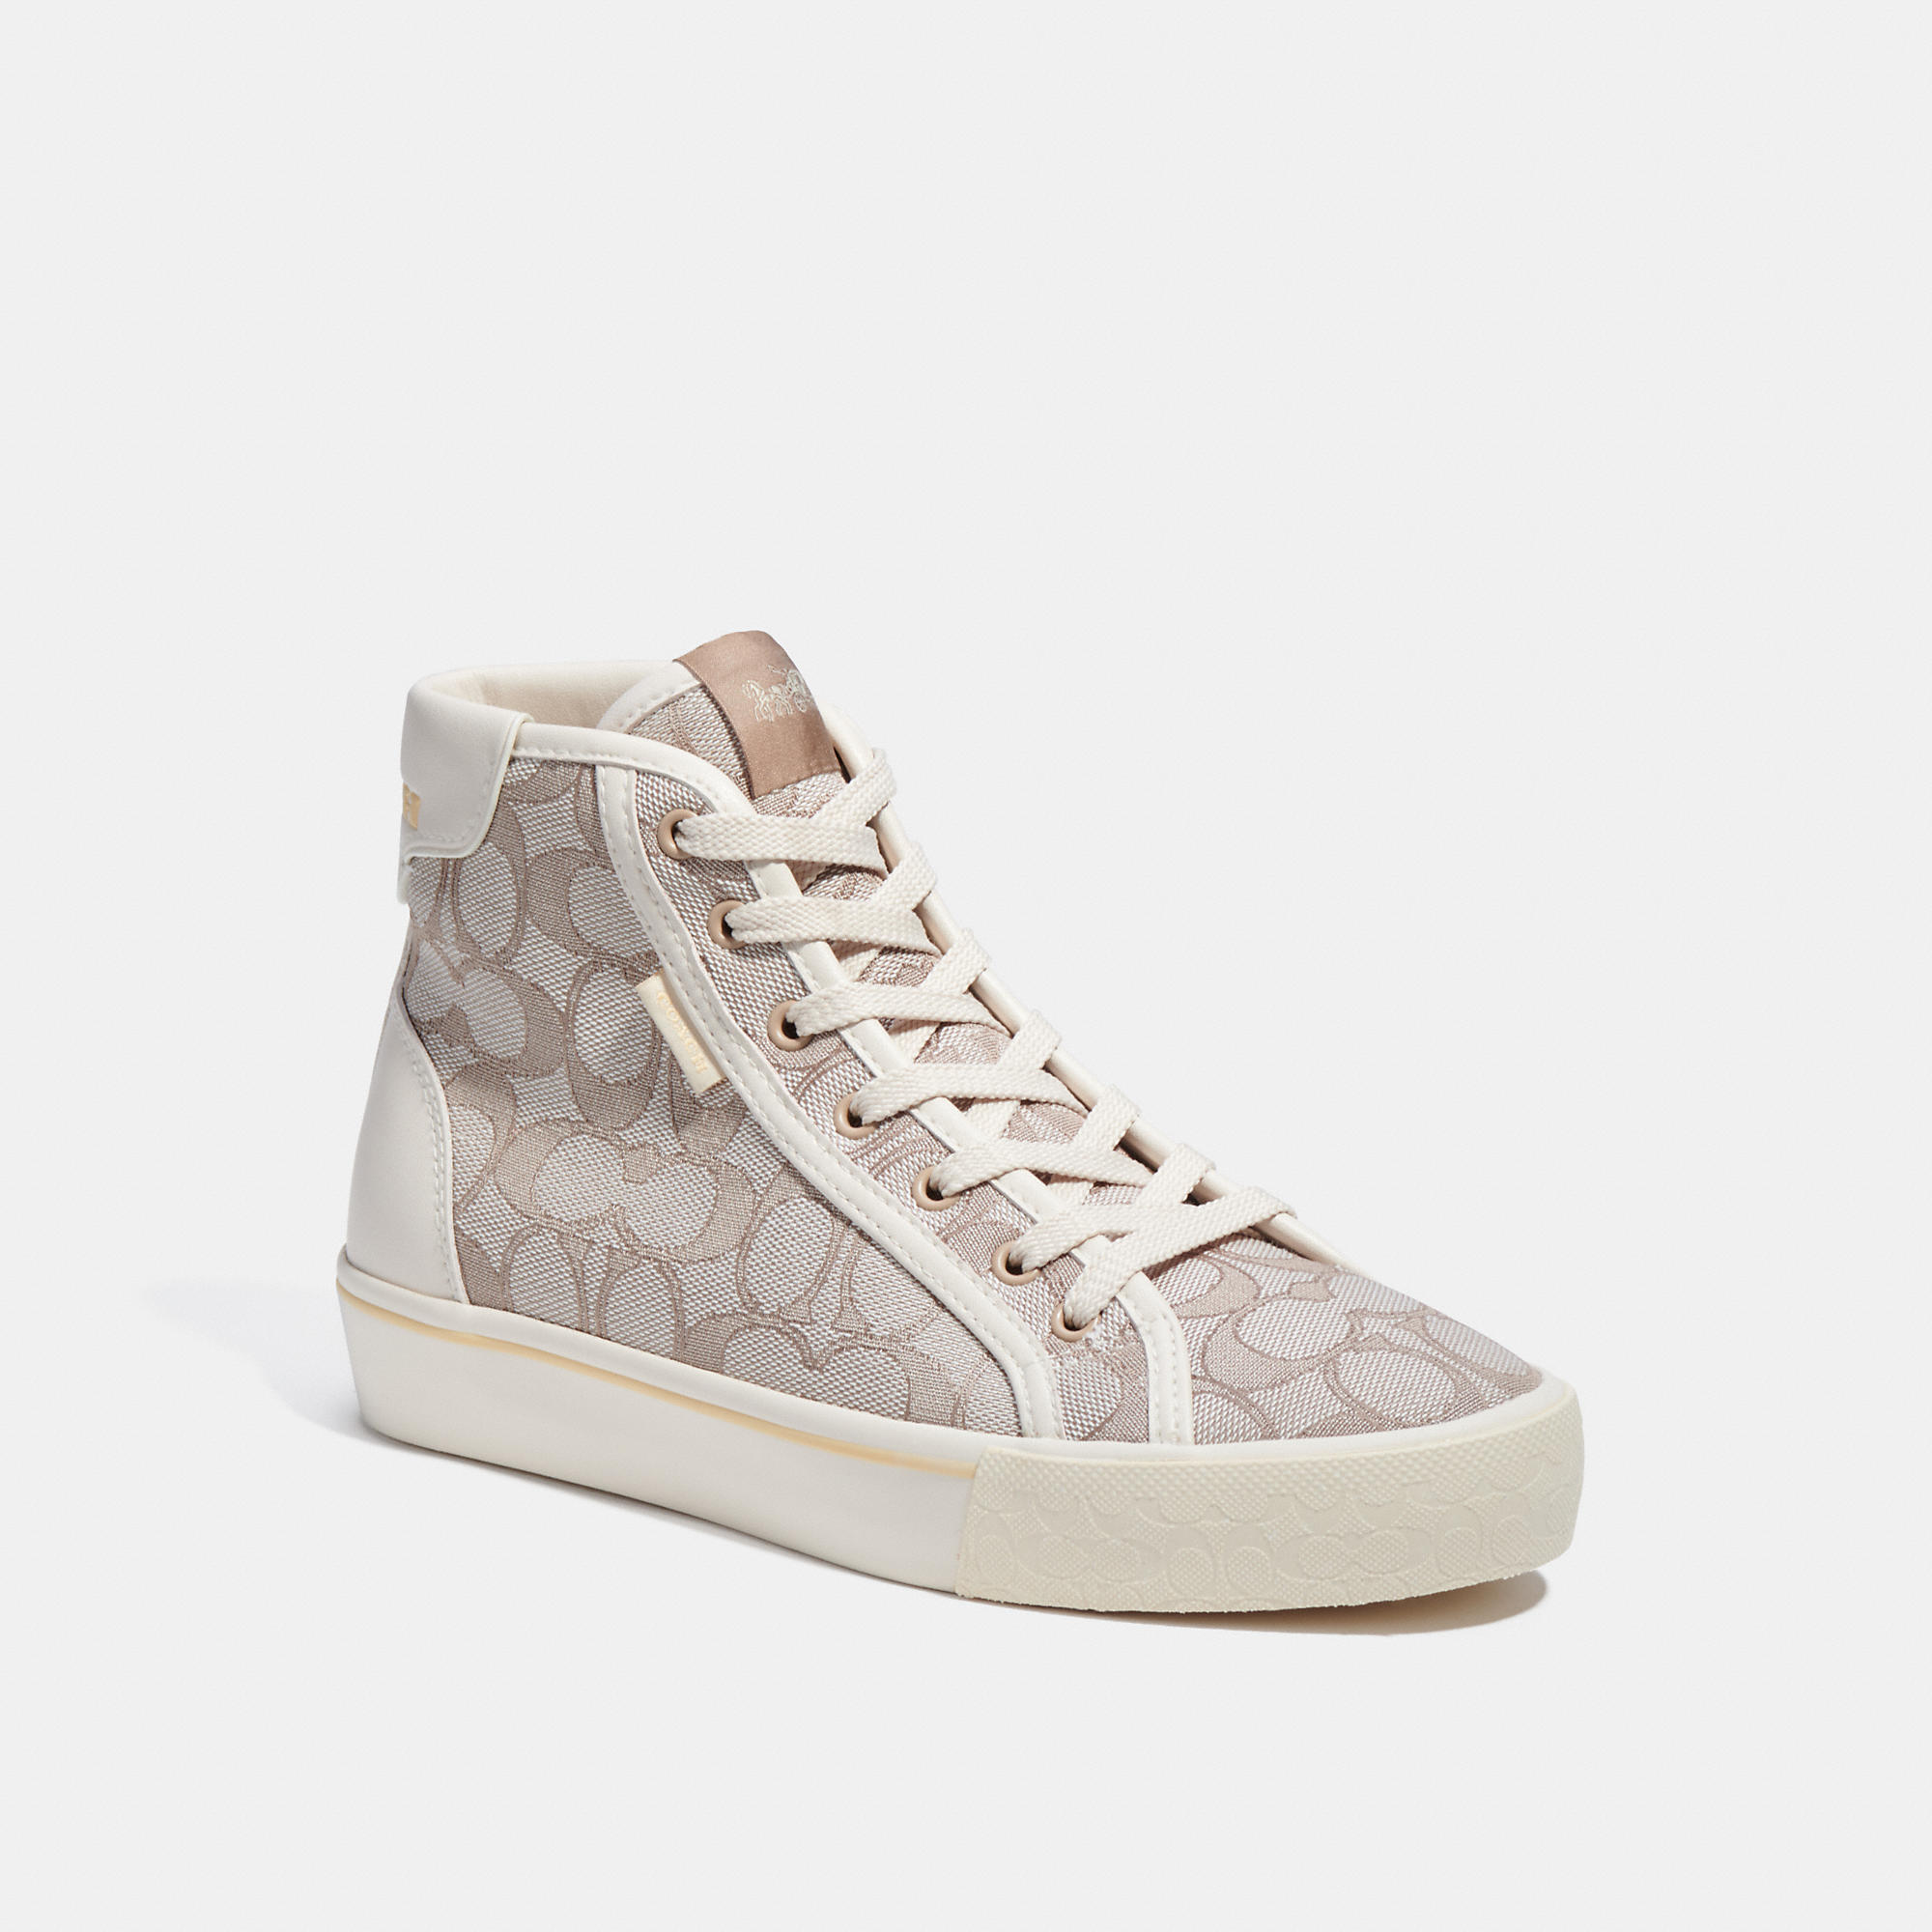 Coach Outlet Citysole High Top Platform Sneaker In Signature Jacquard In Beige